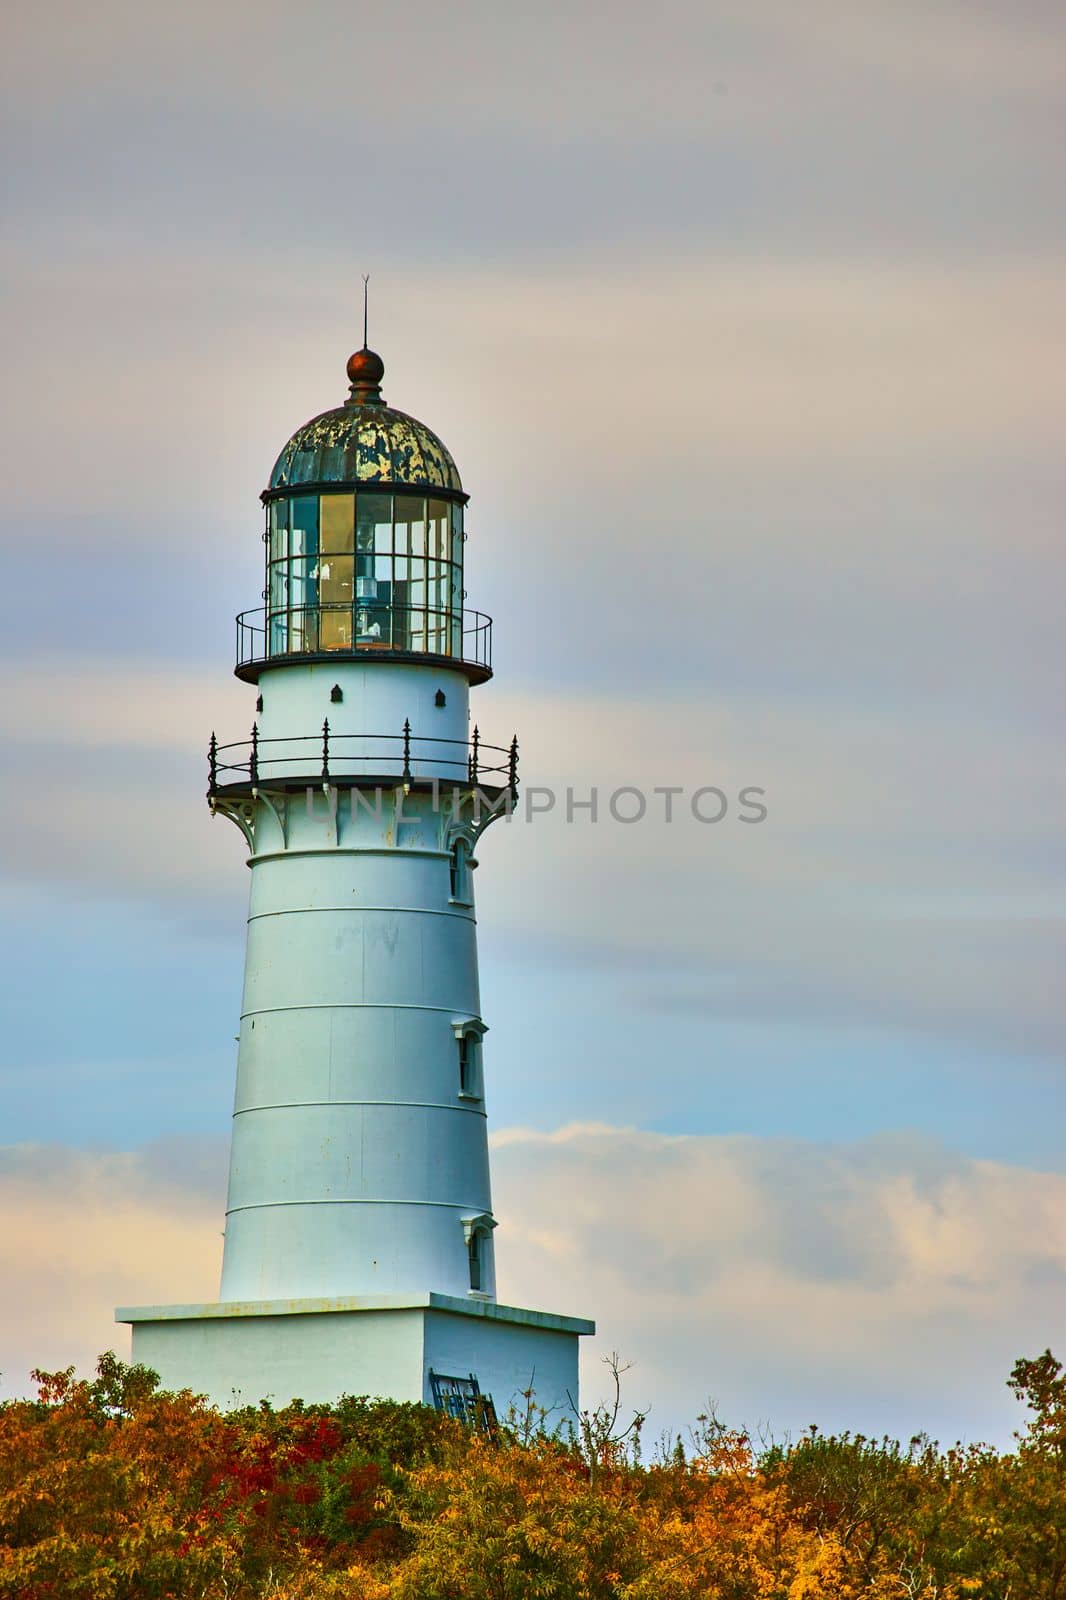 Image of Detail of large iconically shaped lighthouse in fall forest with cloudy sky